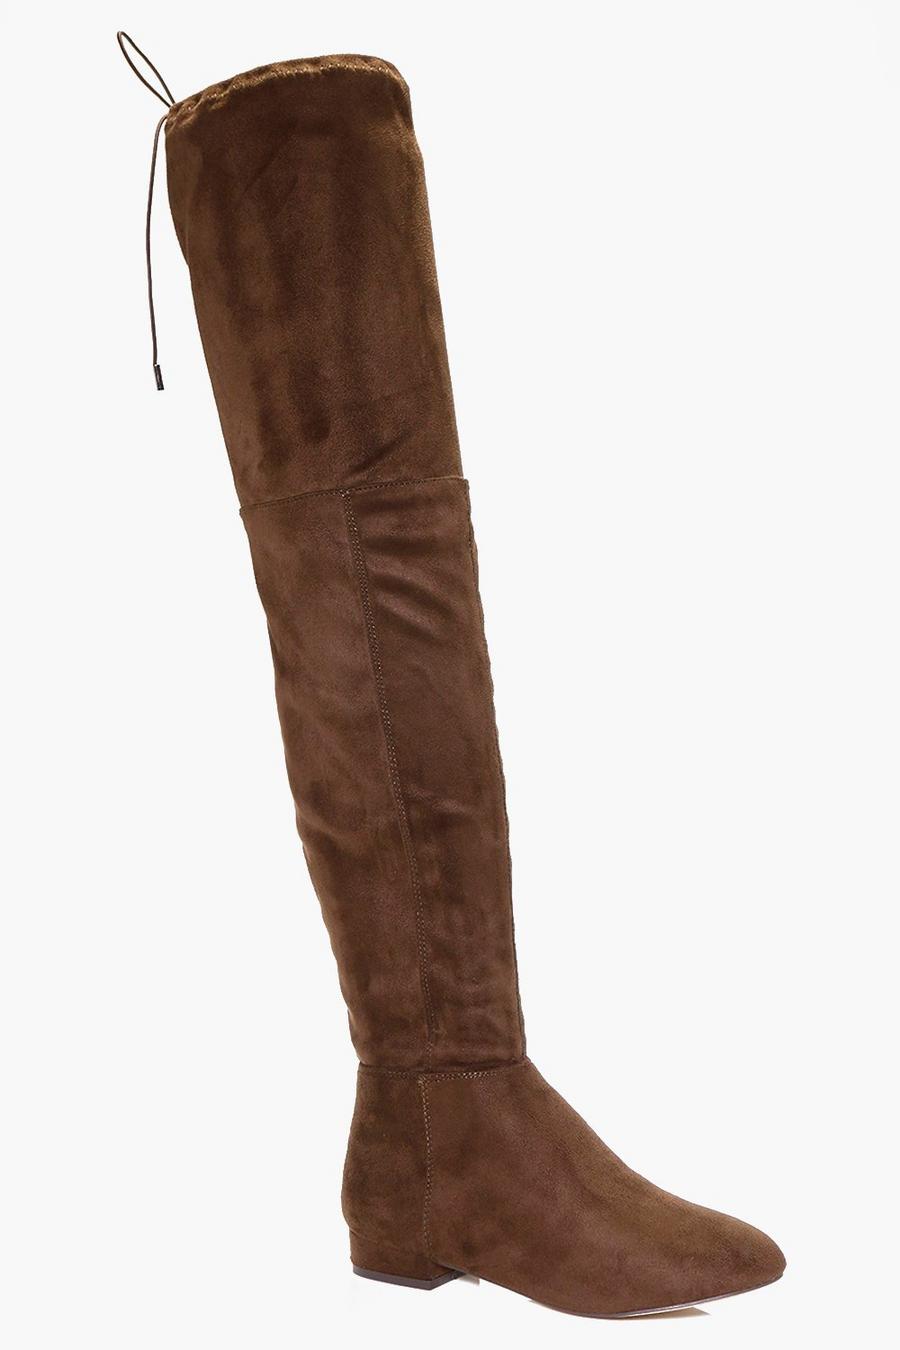 Mocha Flat Tie Back Thigh High Boots image number 1